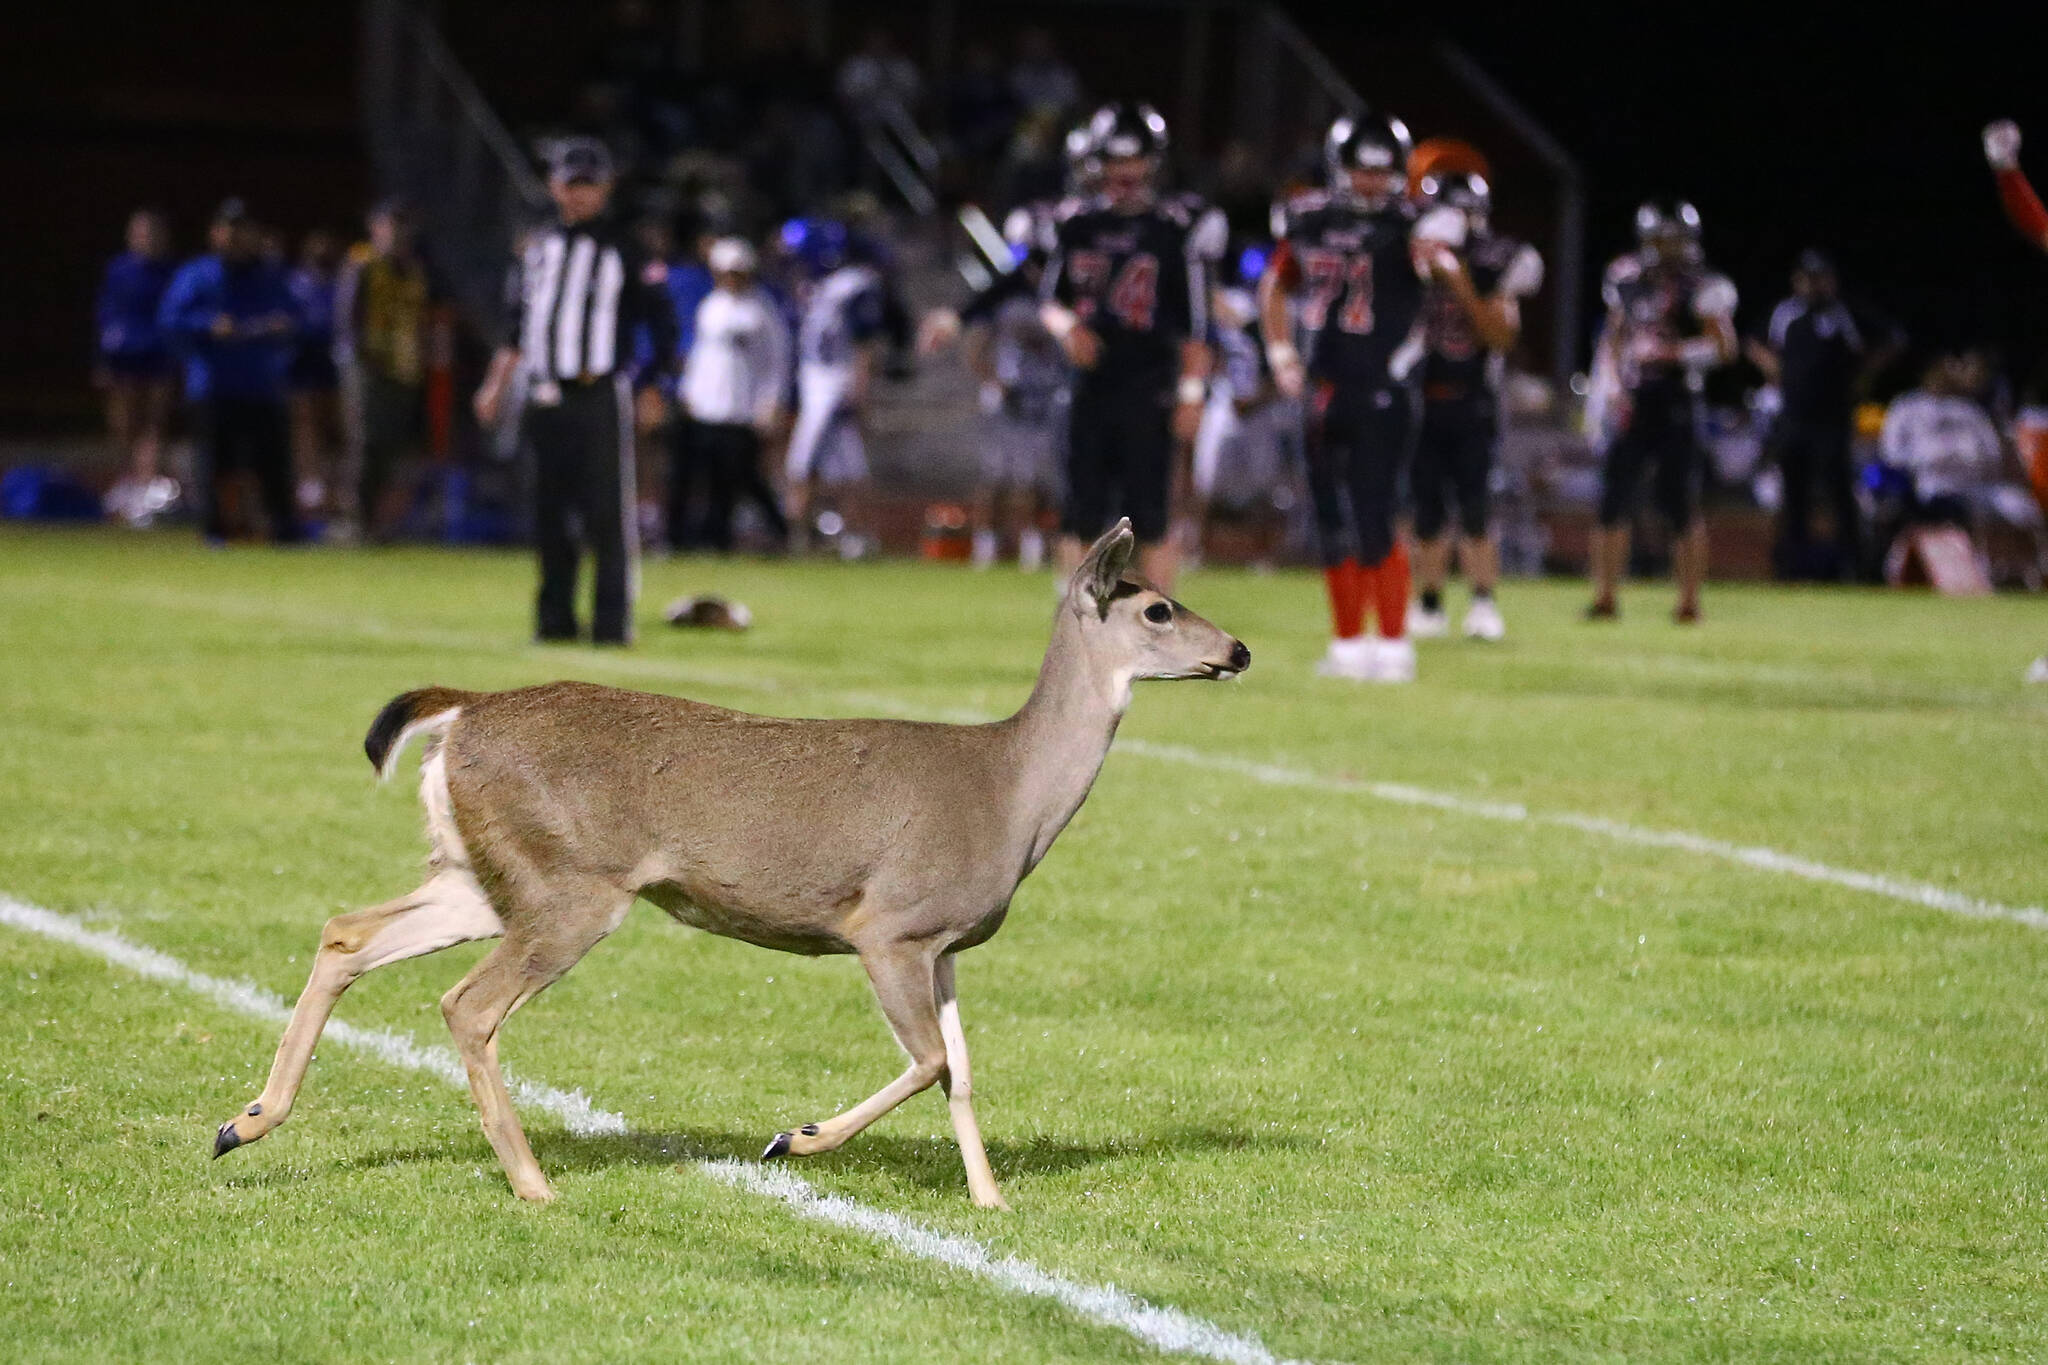 Photo by John Fisken
A doe and her fawn briefly joined the Coupeville High School football game Friday night, before running off the field.